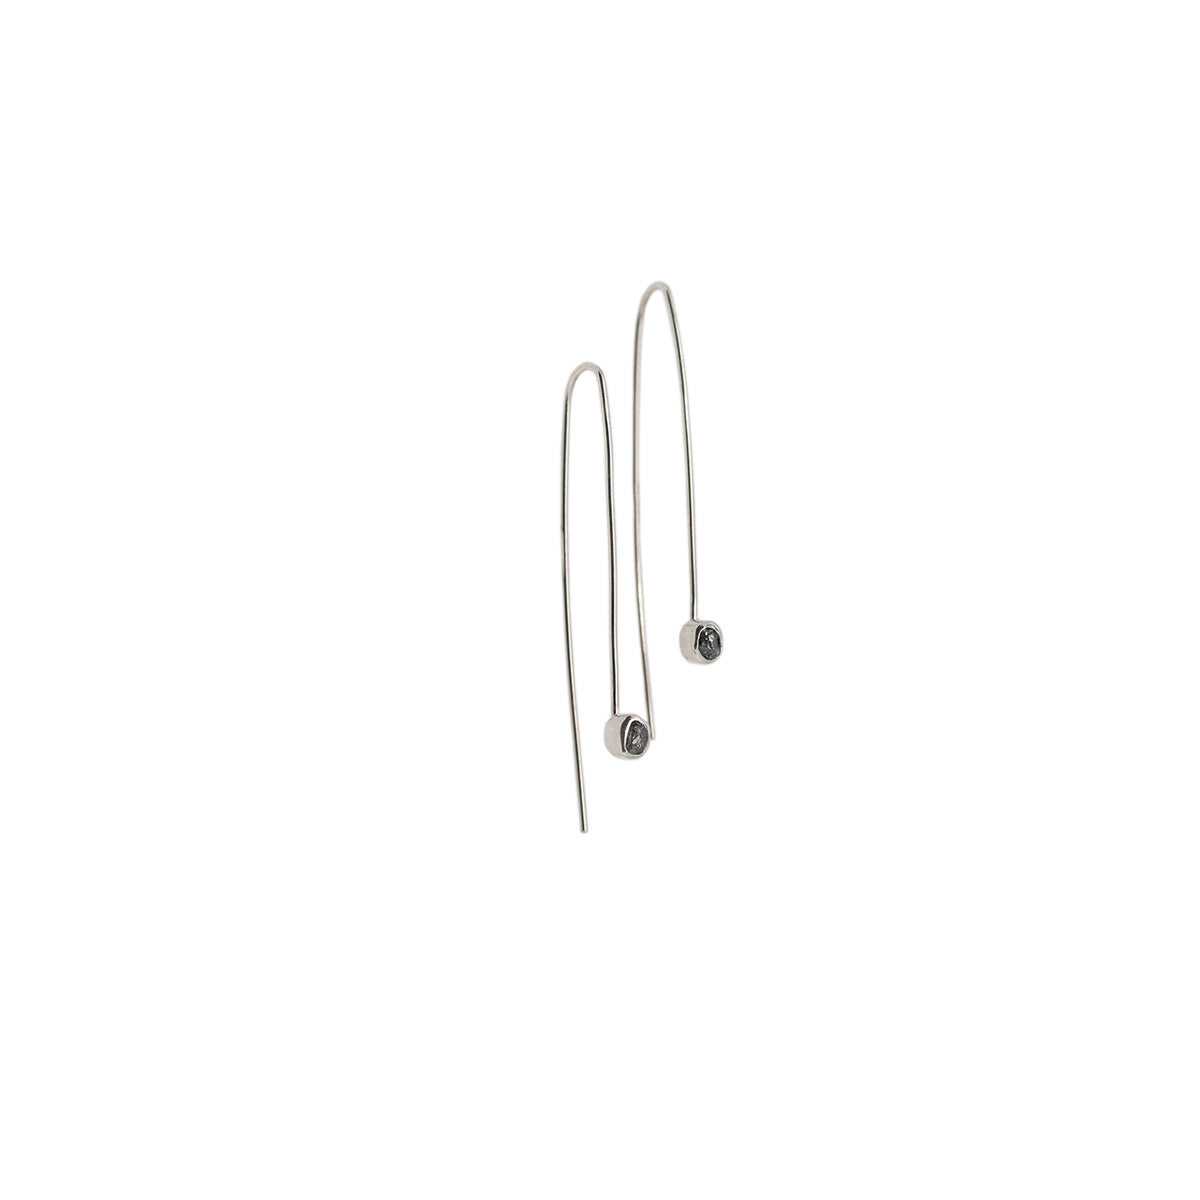 White Background Shot of Rock Pebble Metal Curved Dangle Earrings Fine Silver  Bezel around Rough Diamond Shard on Sterling Silver Ear Wires